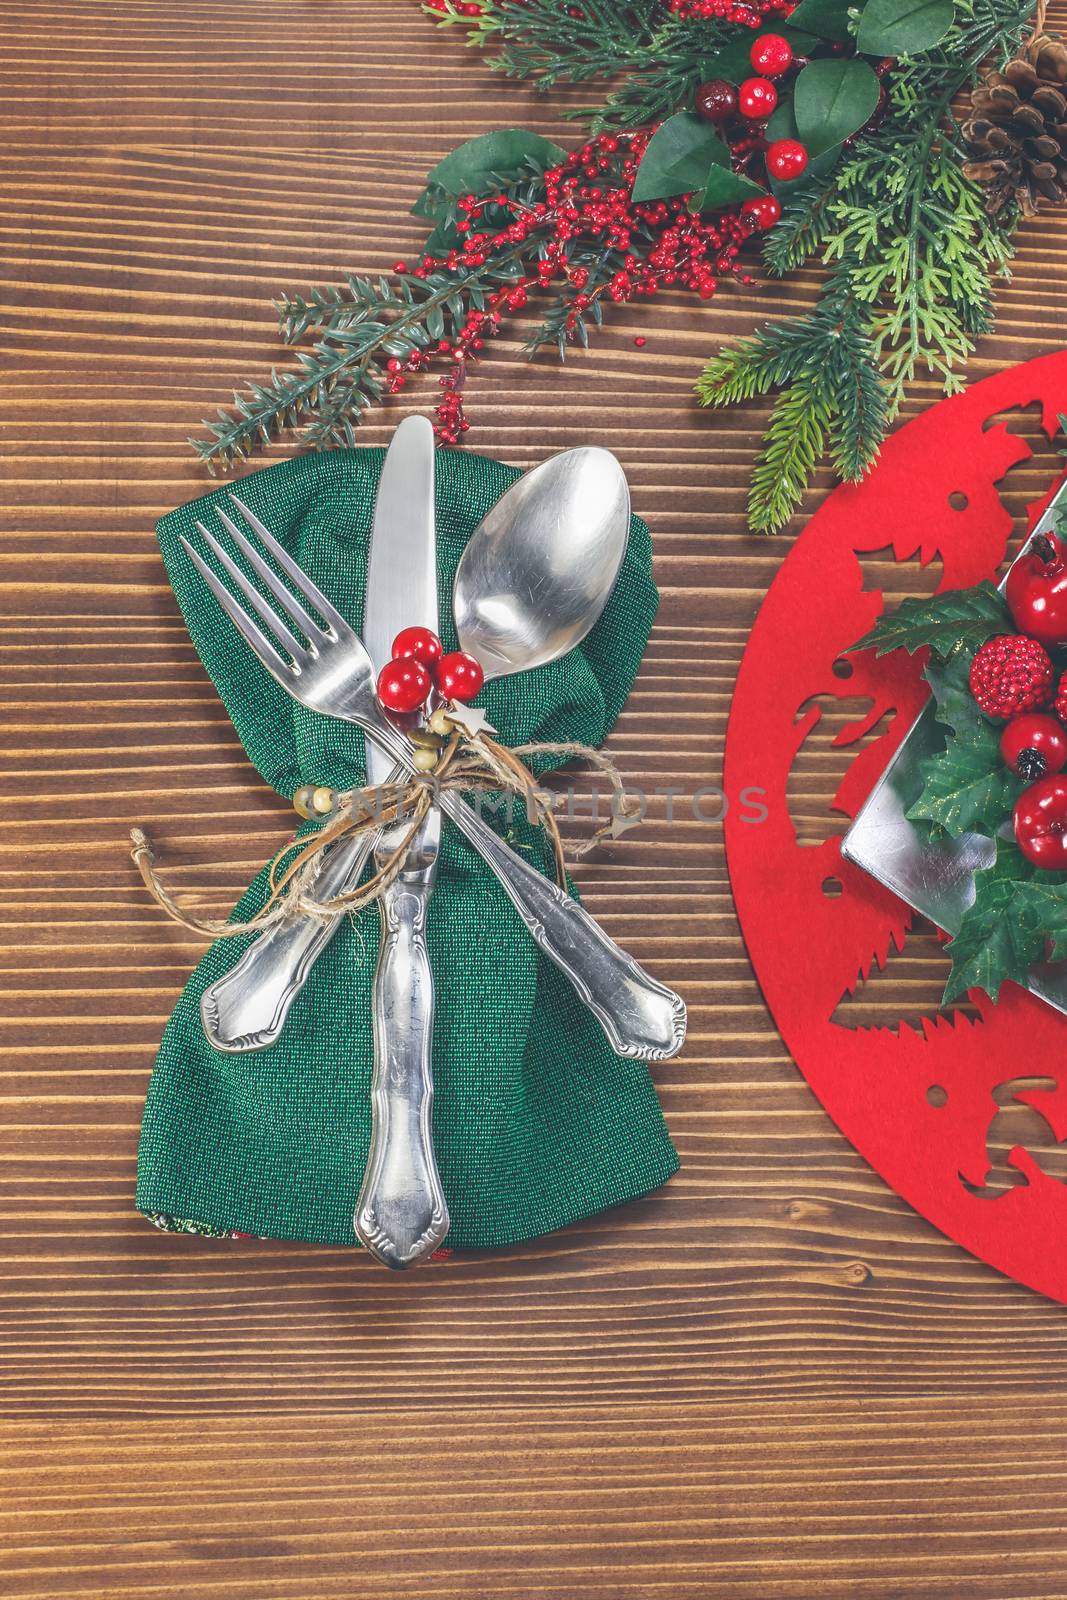 Christmas background with silverware and fir tree. Christmas vintage concept.